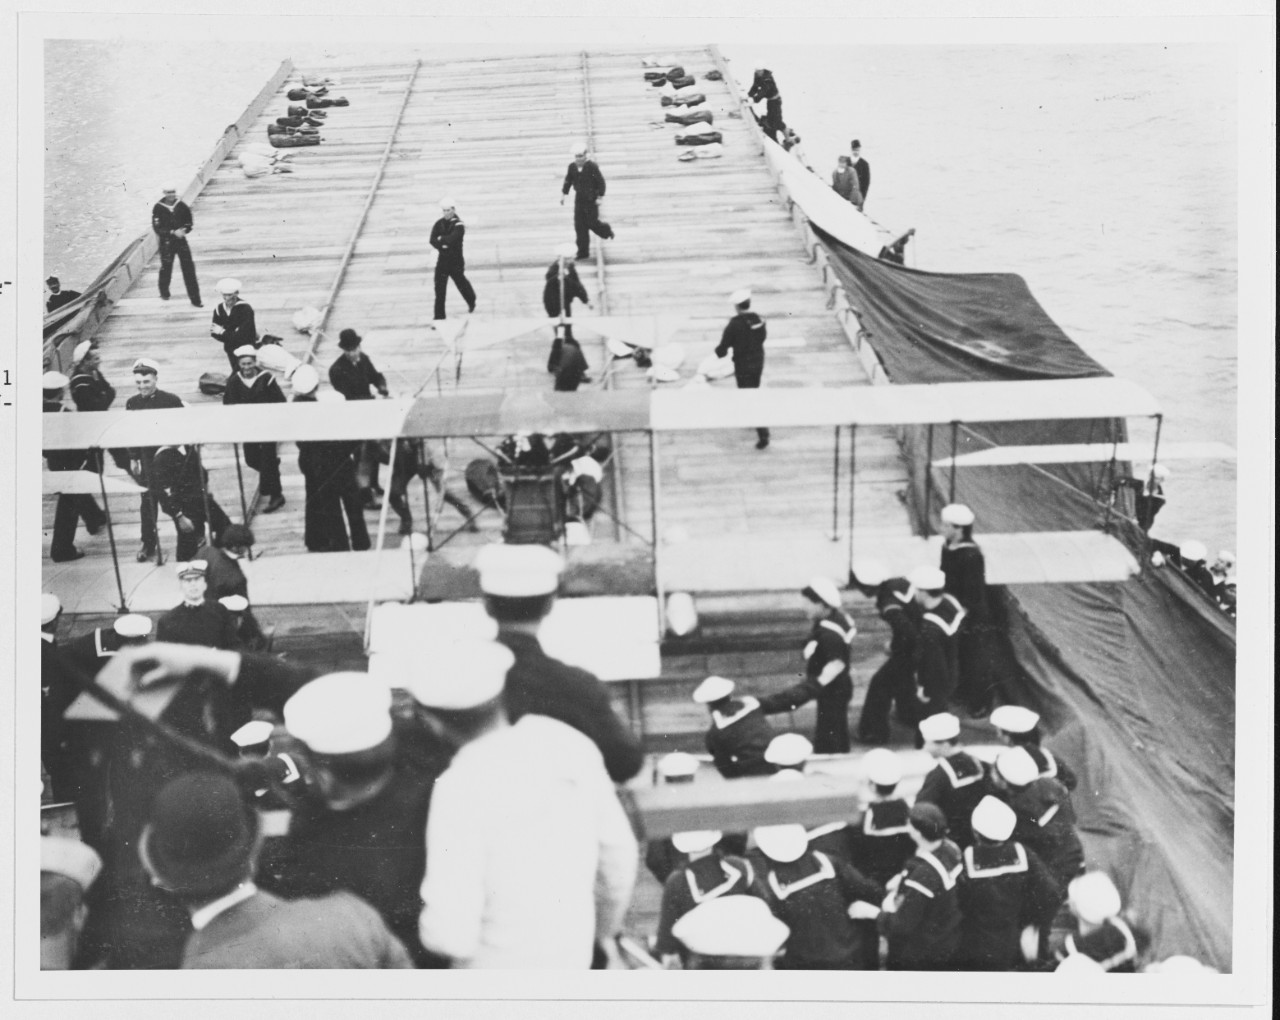 Photo #: NH 77584  First airplane landing on a warship, 18 January 1911